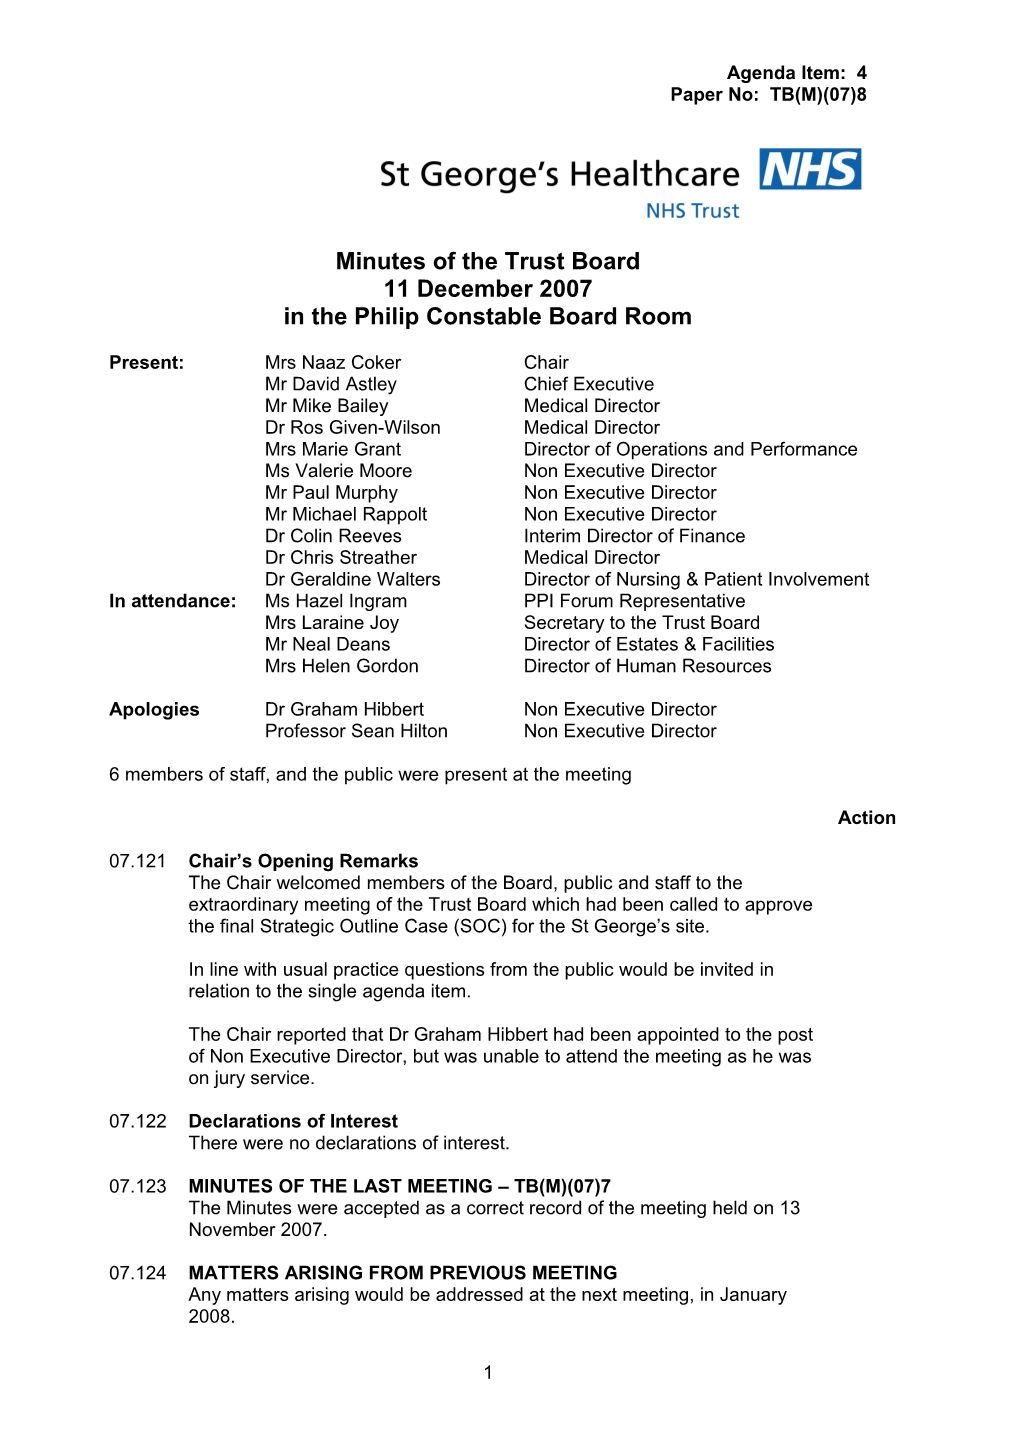 Minutes of the Trust Board